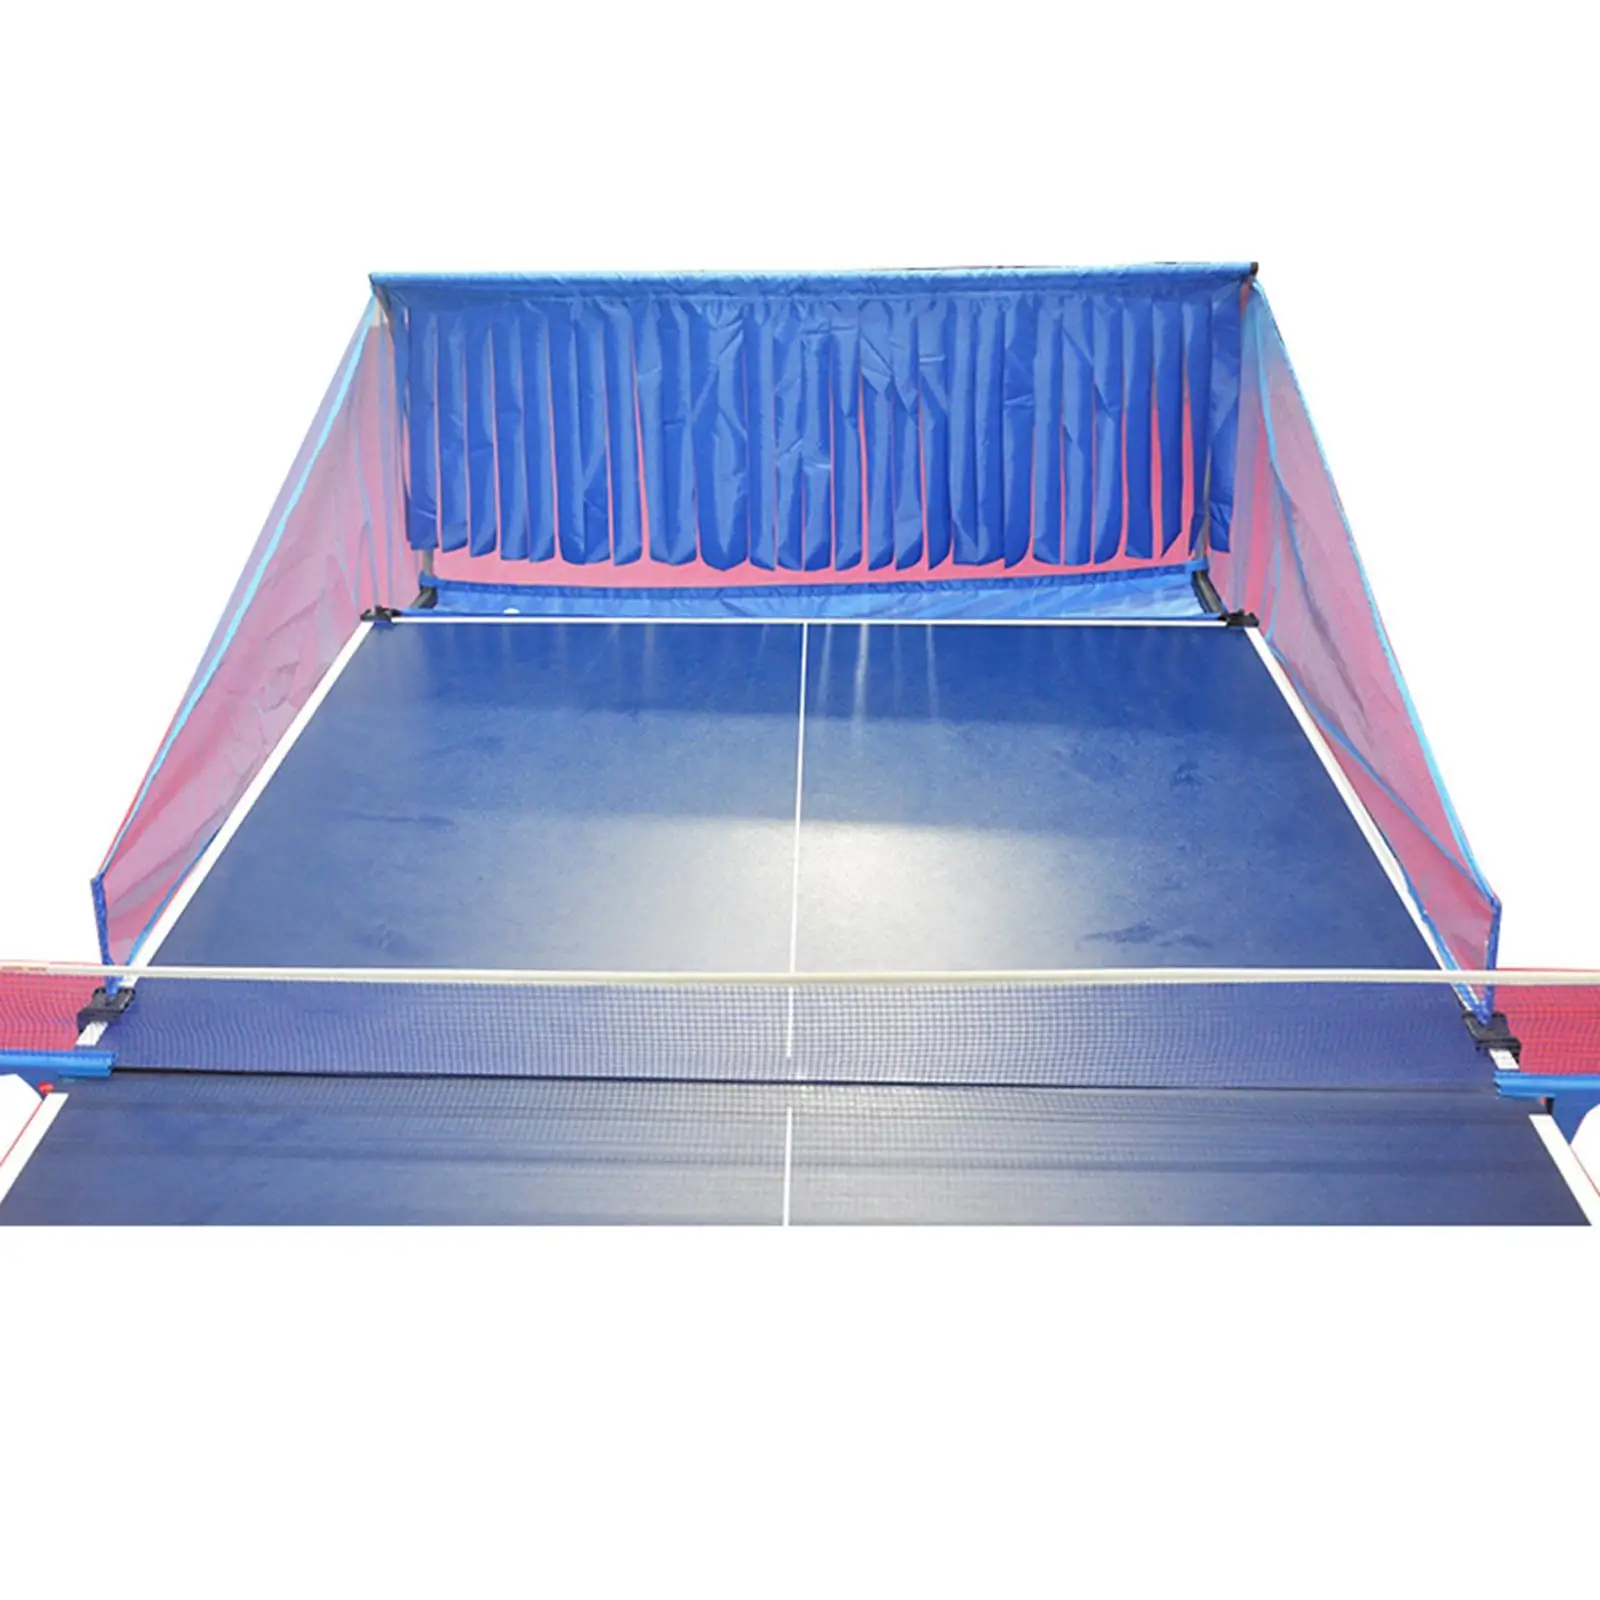 Table Tennis Ball Net Collector with Stainless Steel Frames Professional Portable Multi Ball Serve Ball Netting